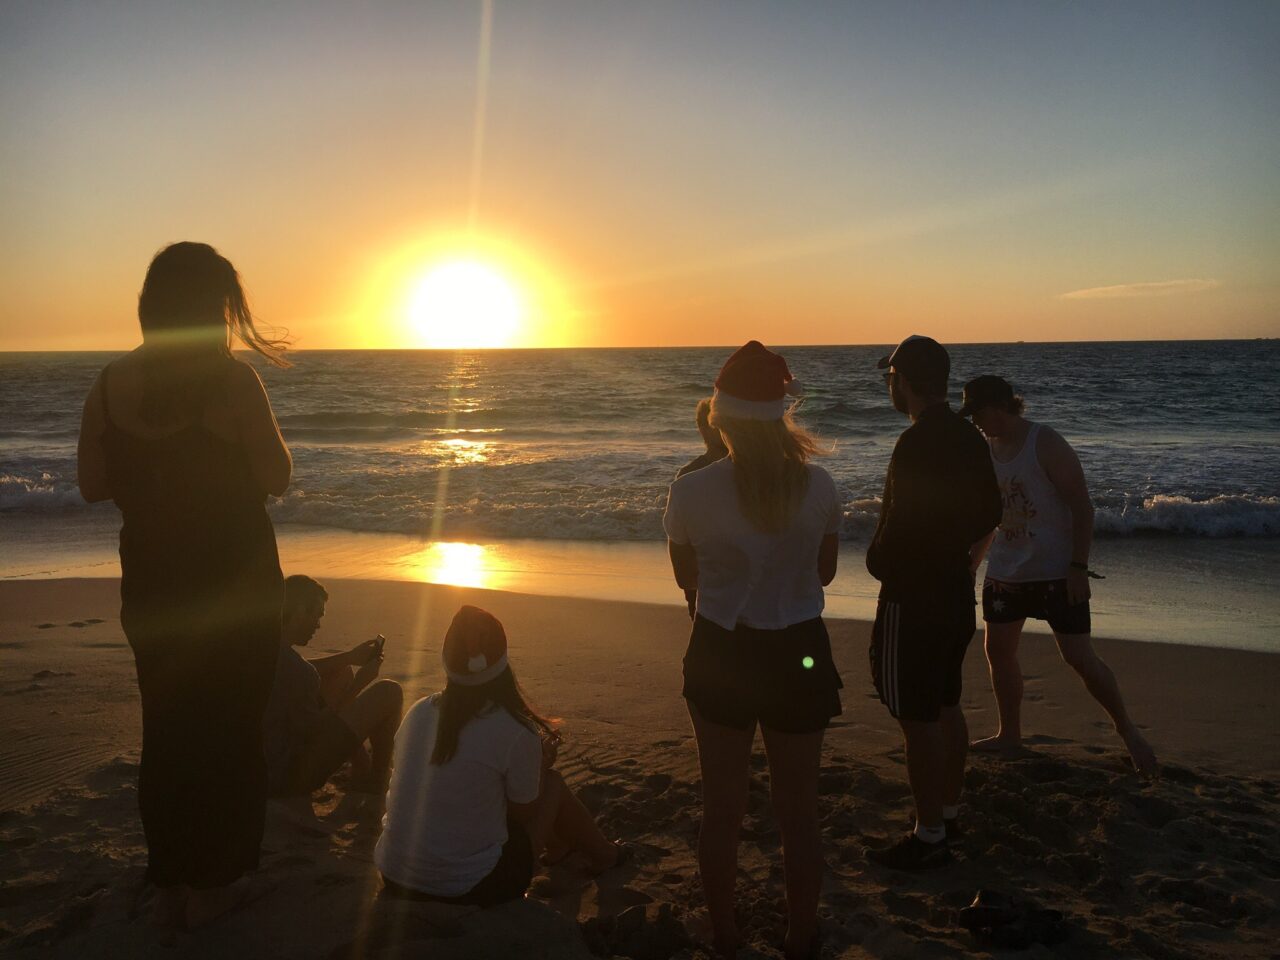 A group of students looking out to a sunset on a beach, two students are wearing Santa hats.